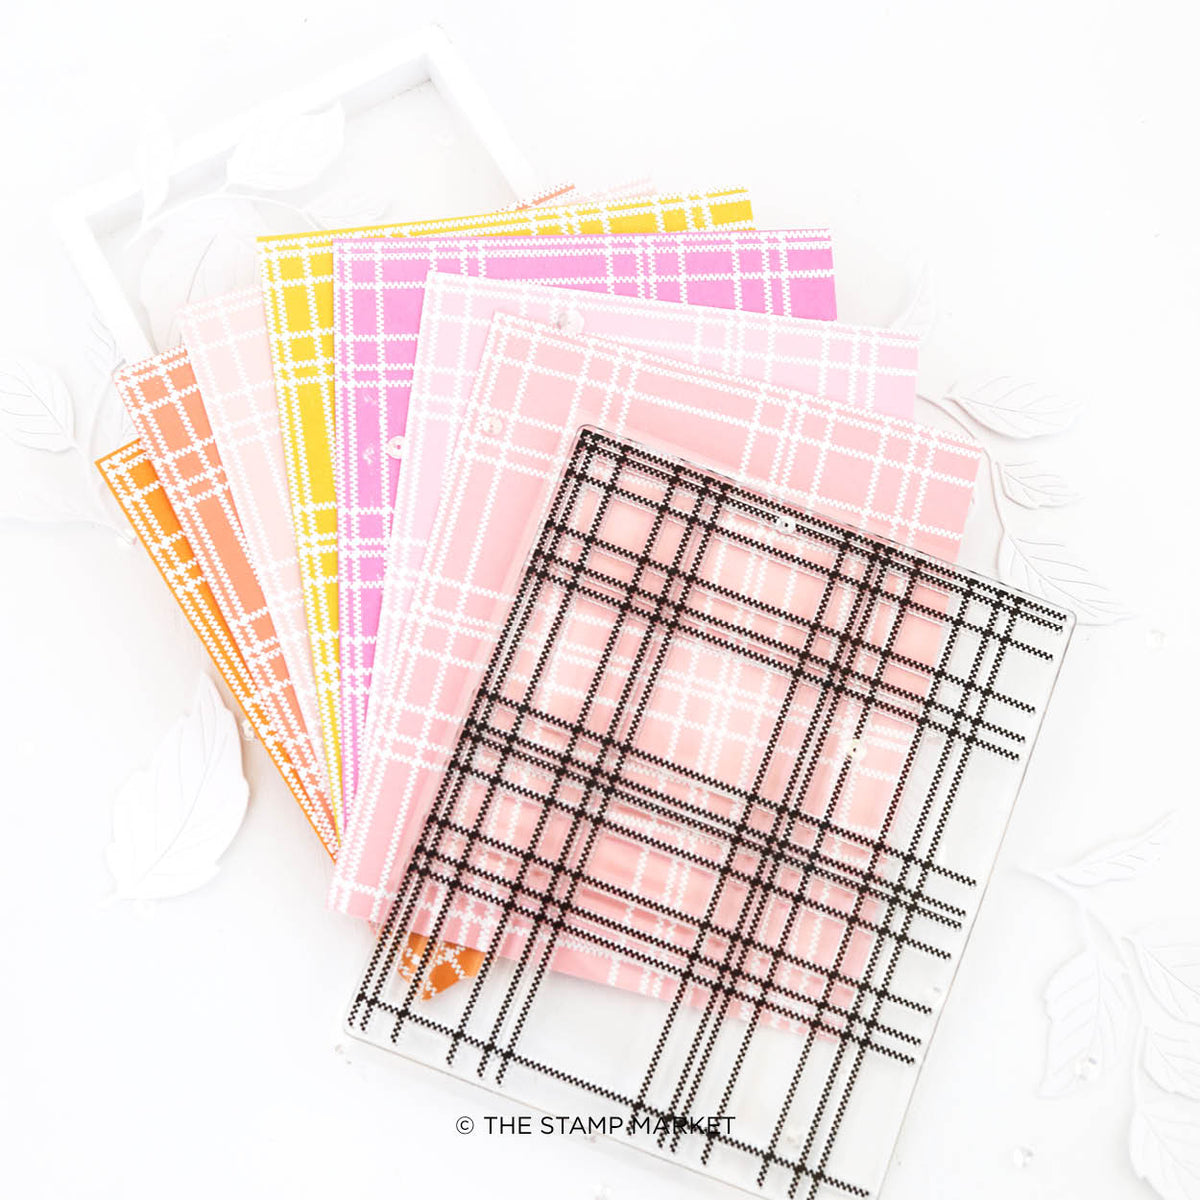 PLAID LINES STAMP – The Stamp Market